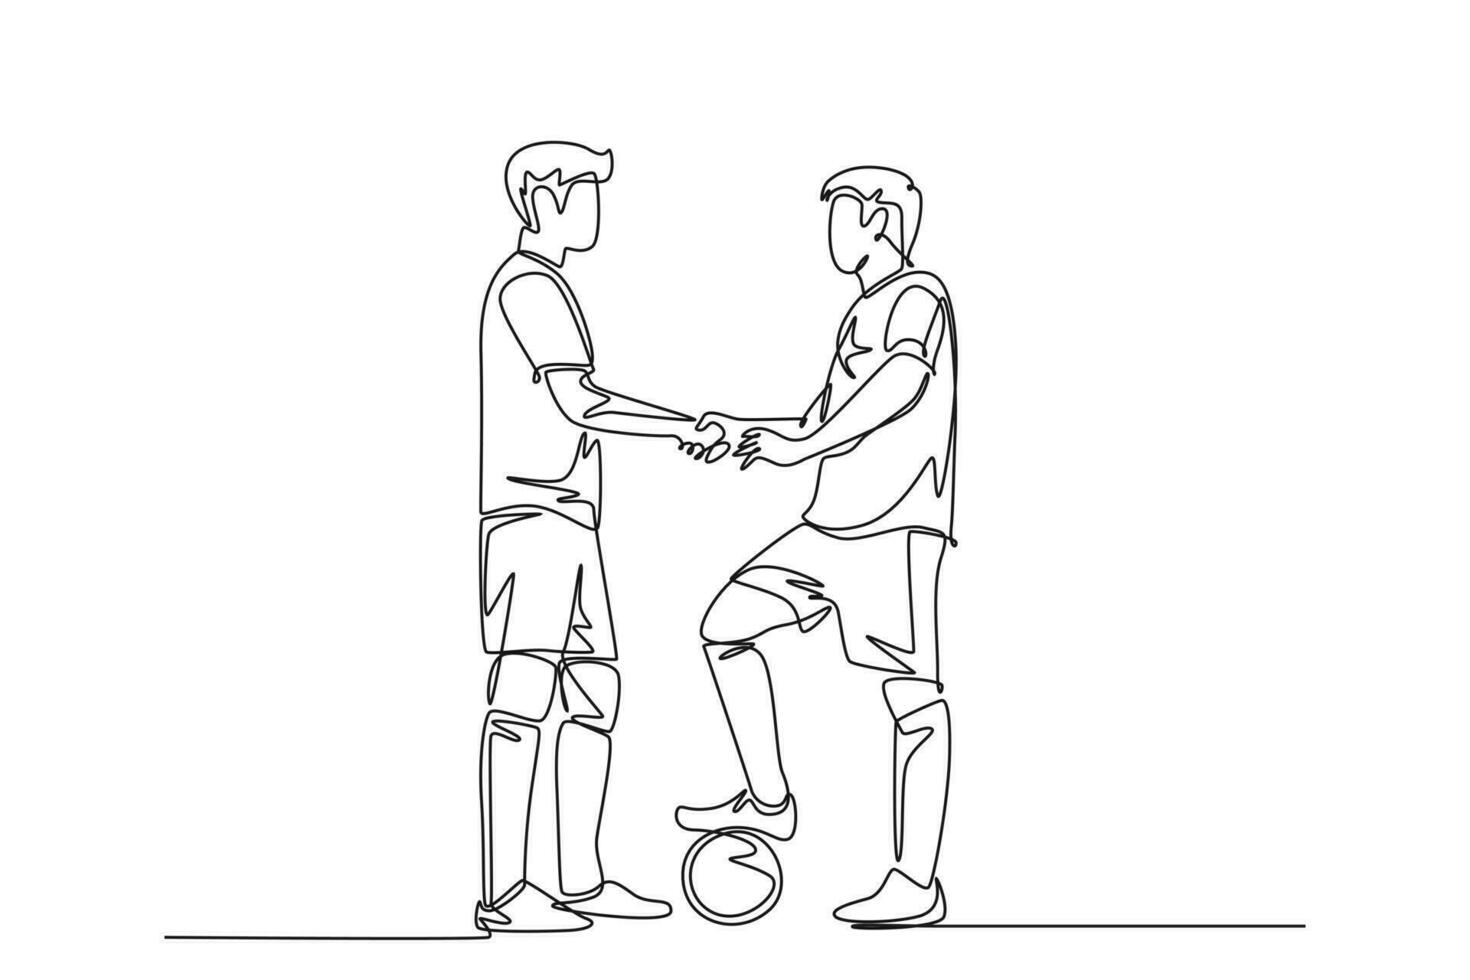 Single one line drawing two football player handshaking to show sportsmanship before starting the match. Respect in soccer sport concept. Modern continuous line draw design graphic vector illustration